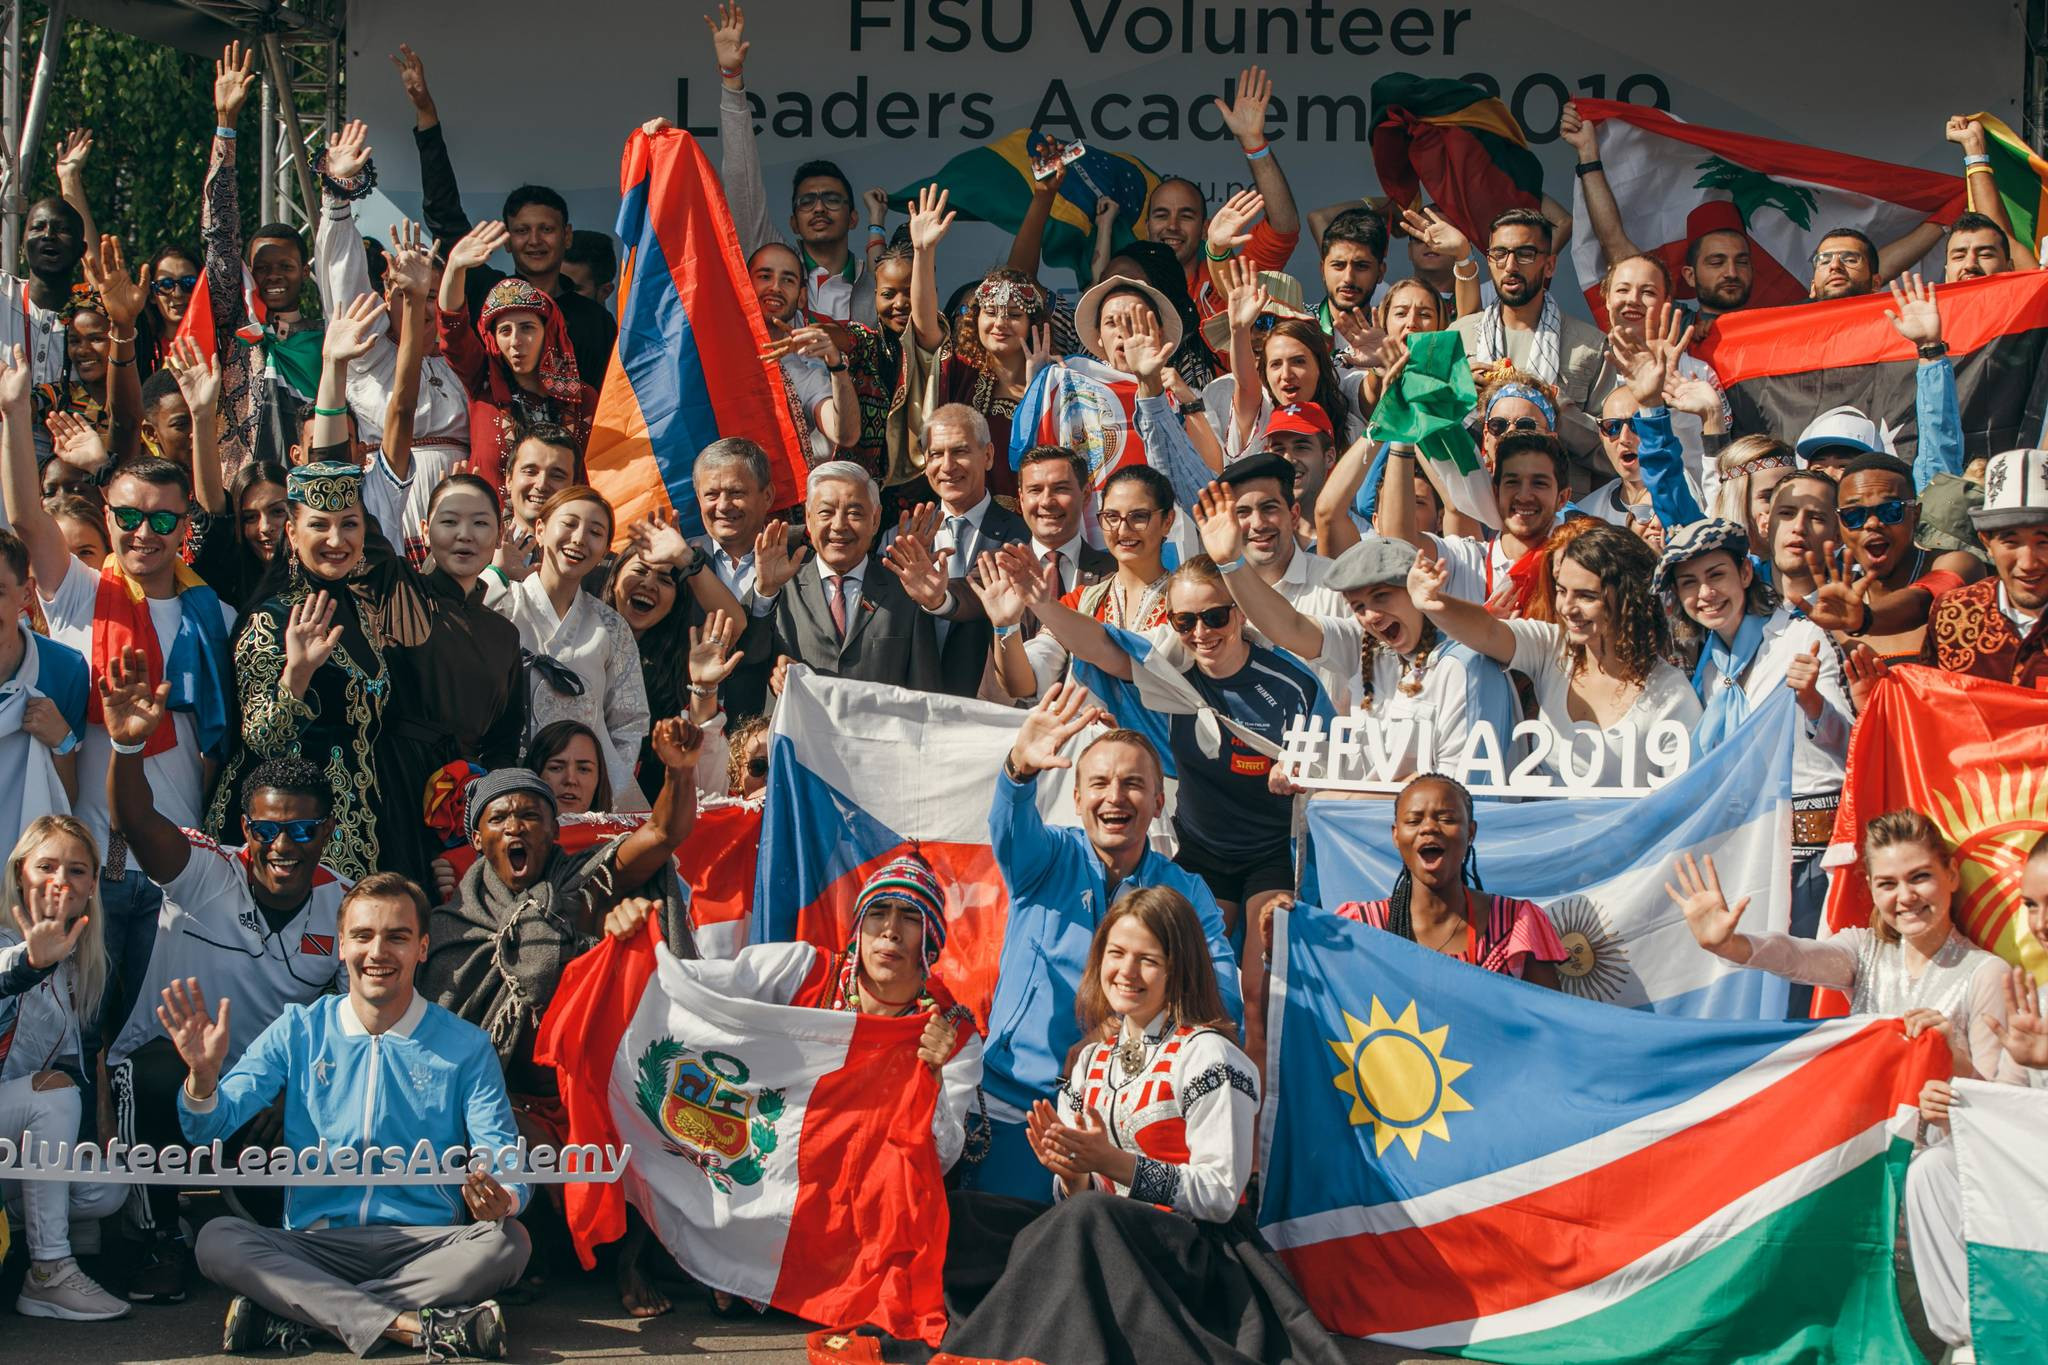 Two sessions of the FISU Volunteer Leaders Academy will be held online this year ©FISU